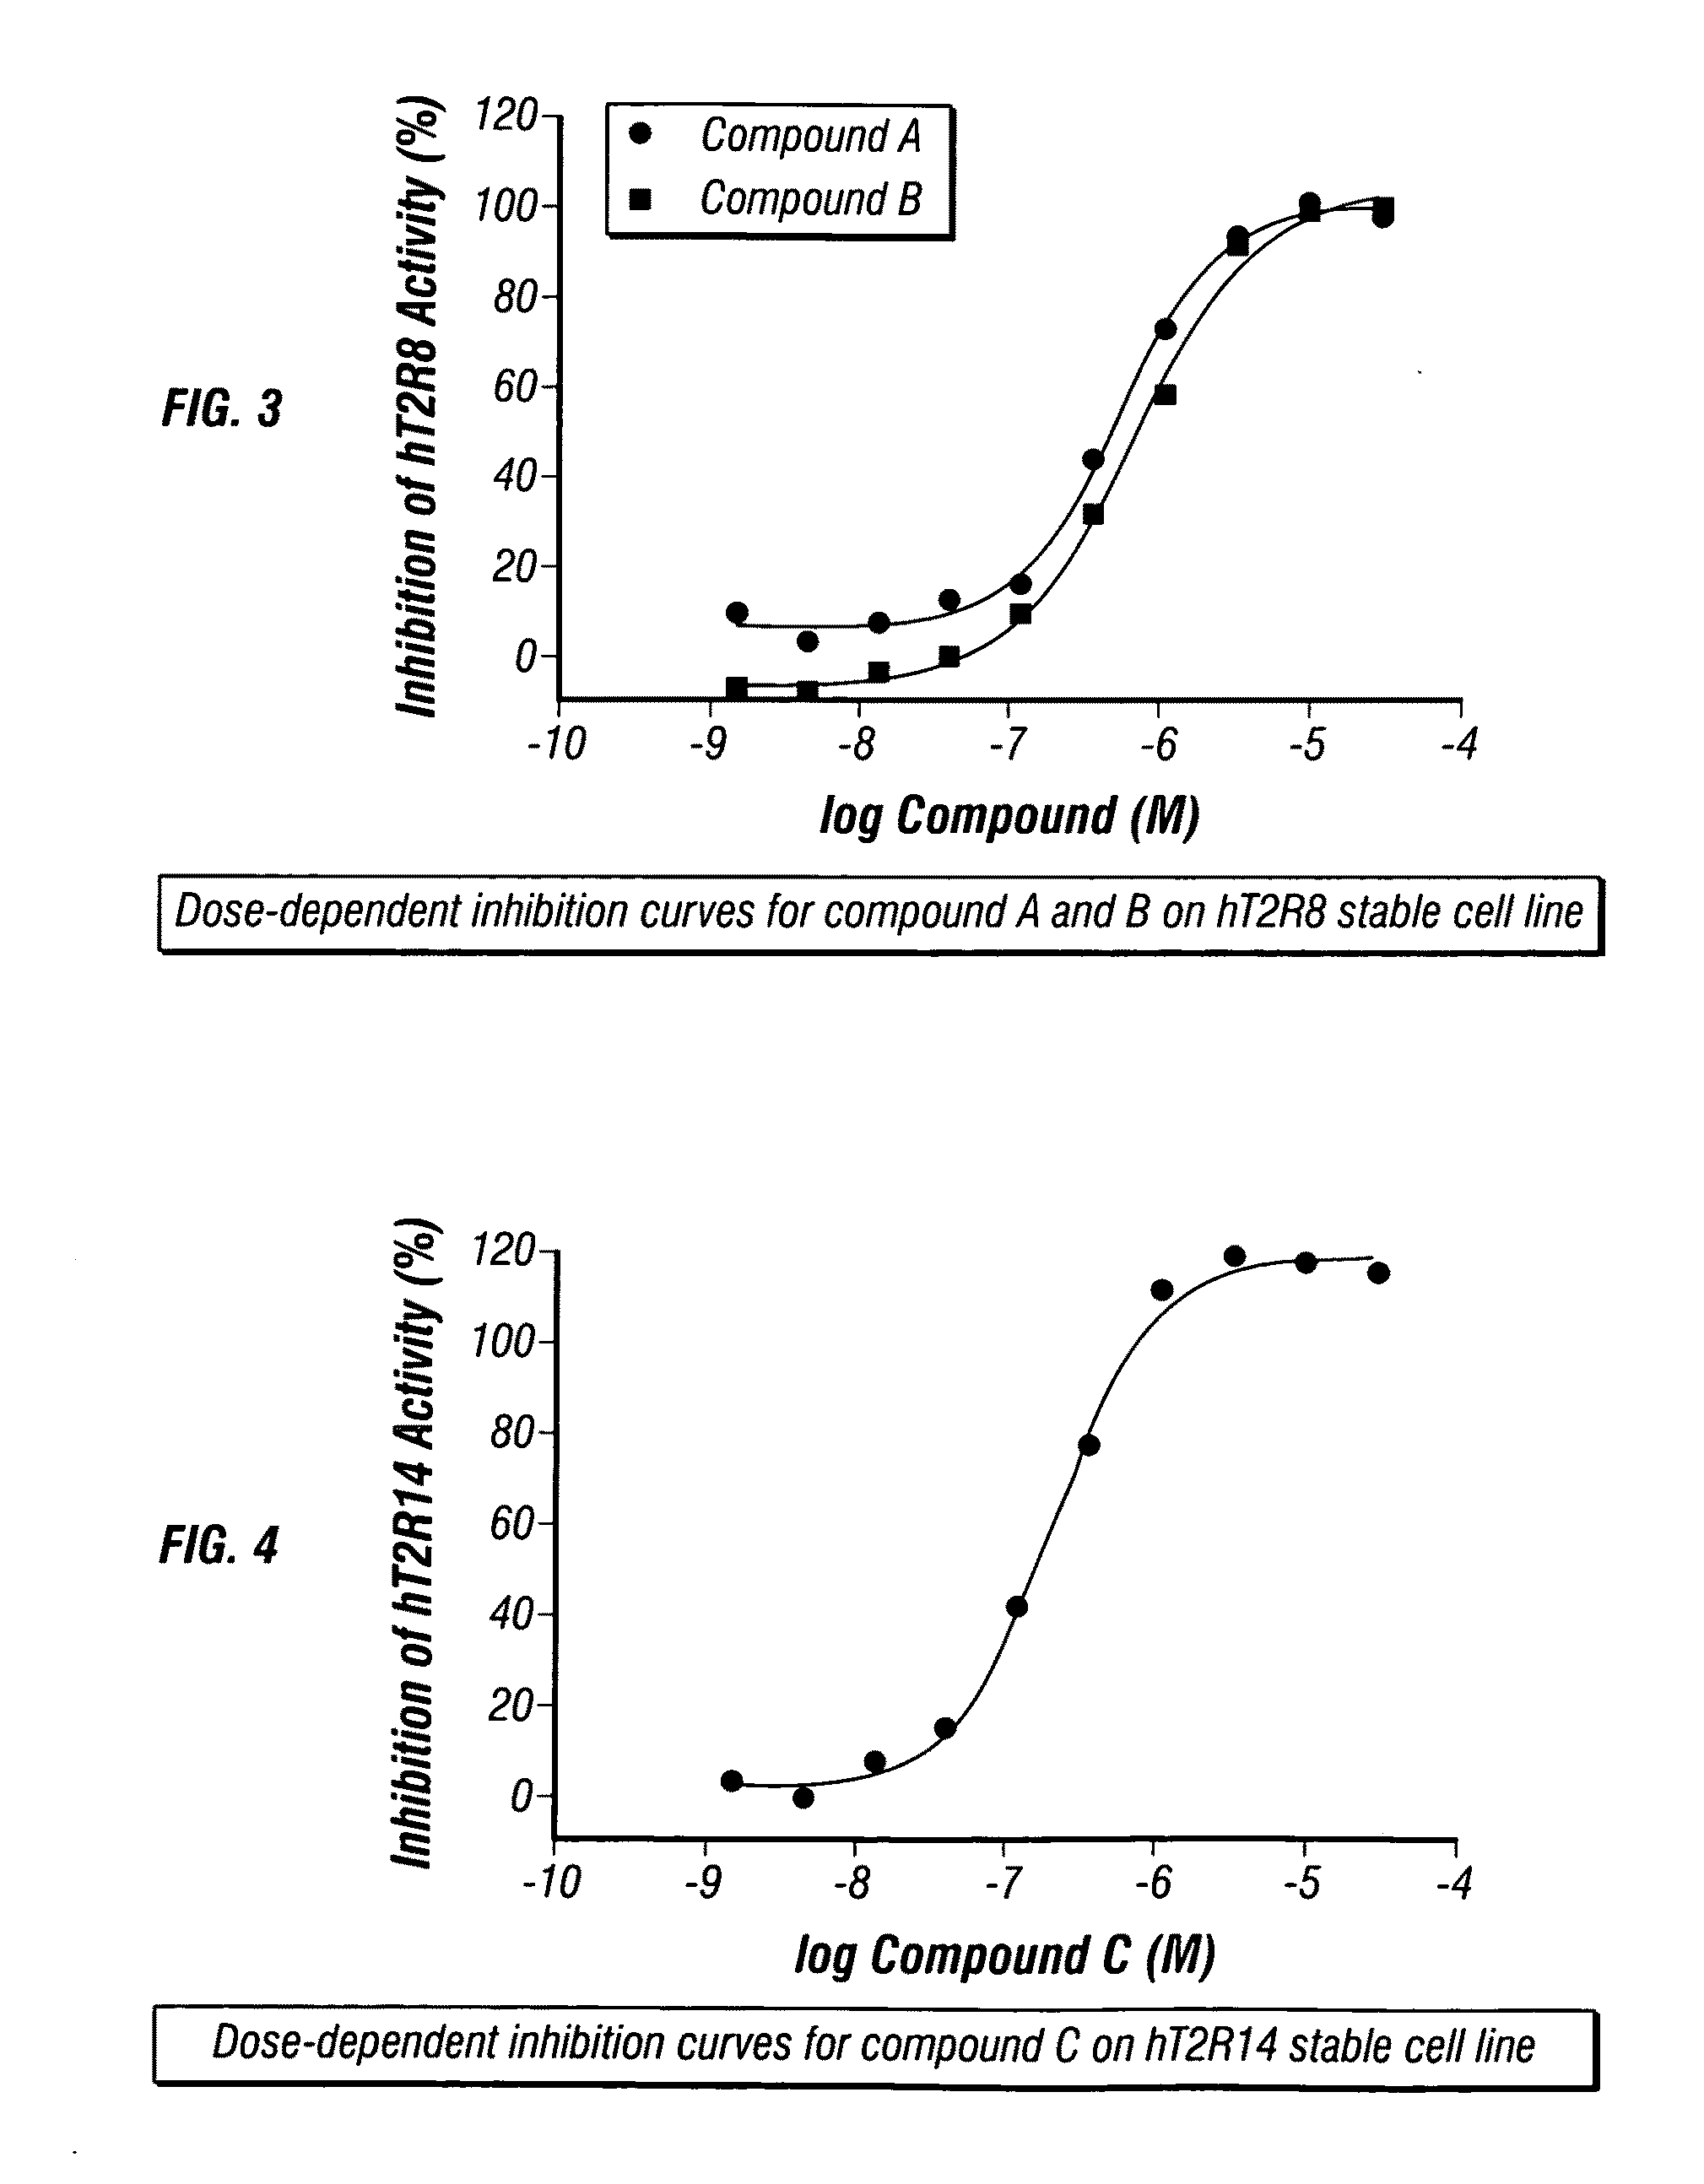 Identification of human T2R receptors that respond to bitter compounds that elicit the bitter taste in compositions, and the use thereof in assays to identify compounds that inhibit (block) bitter taste in composition and use thereof